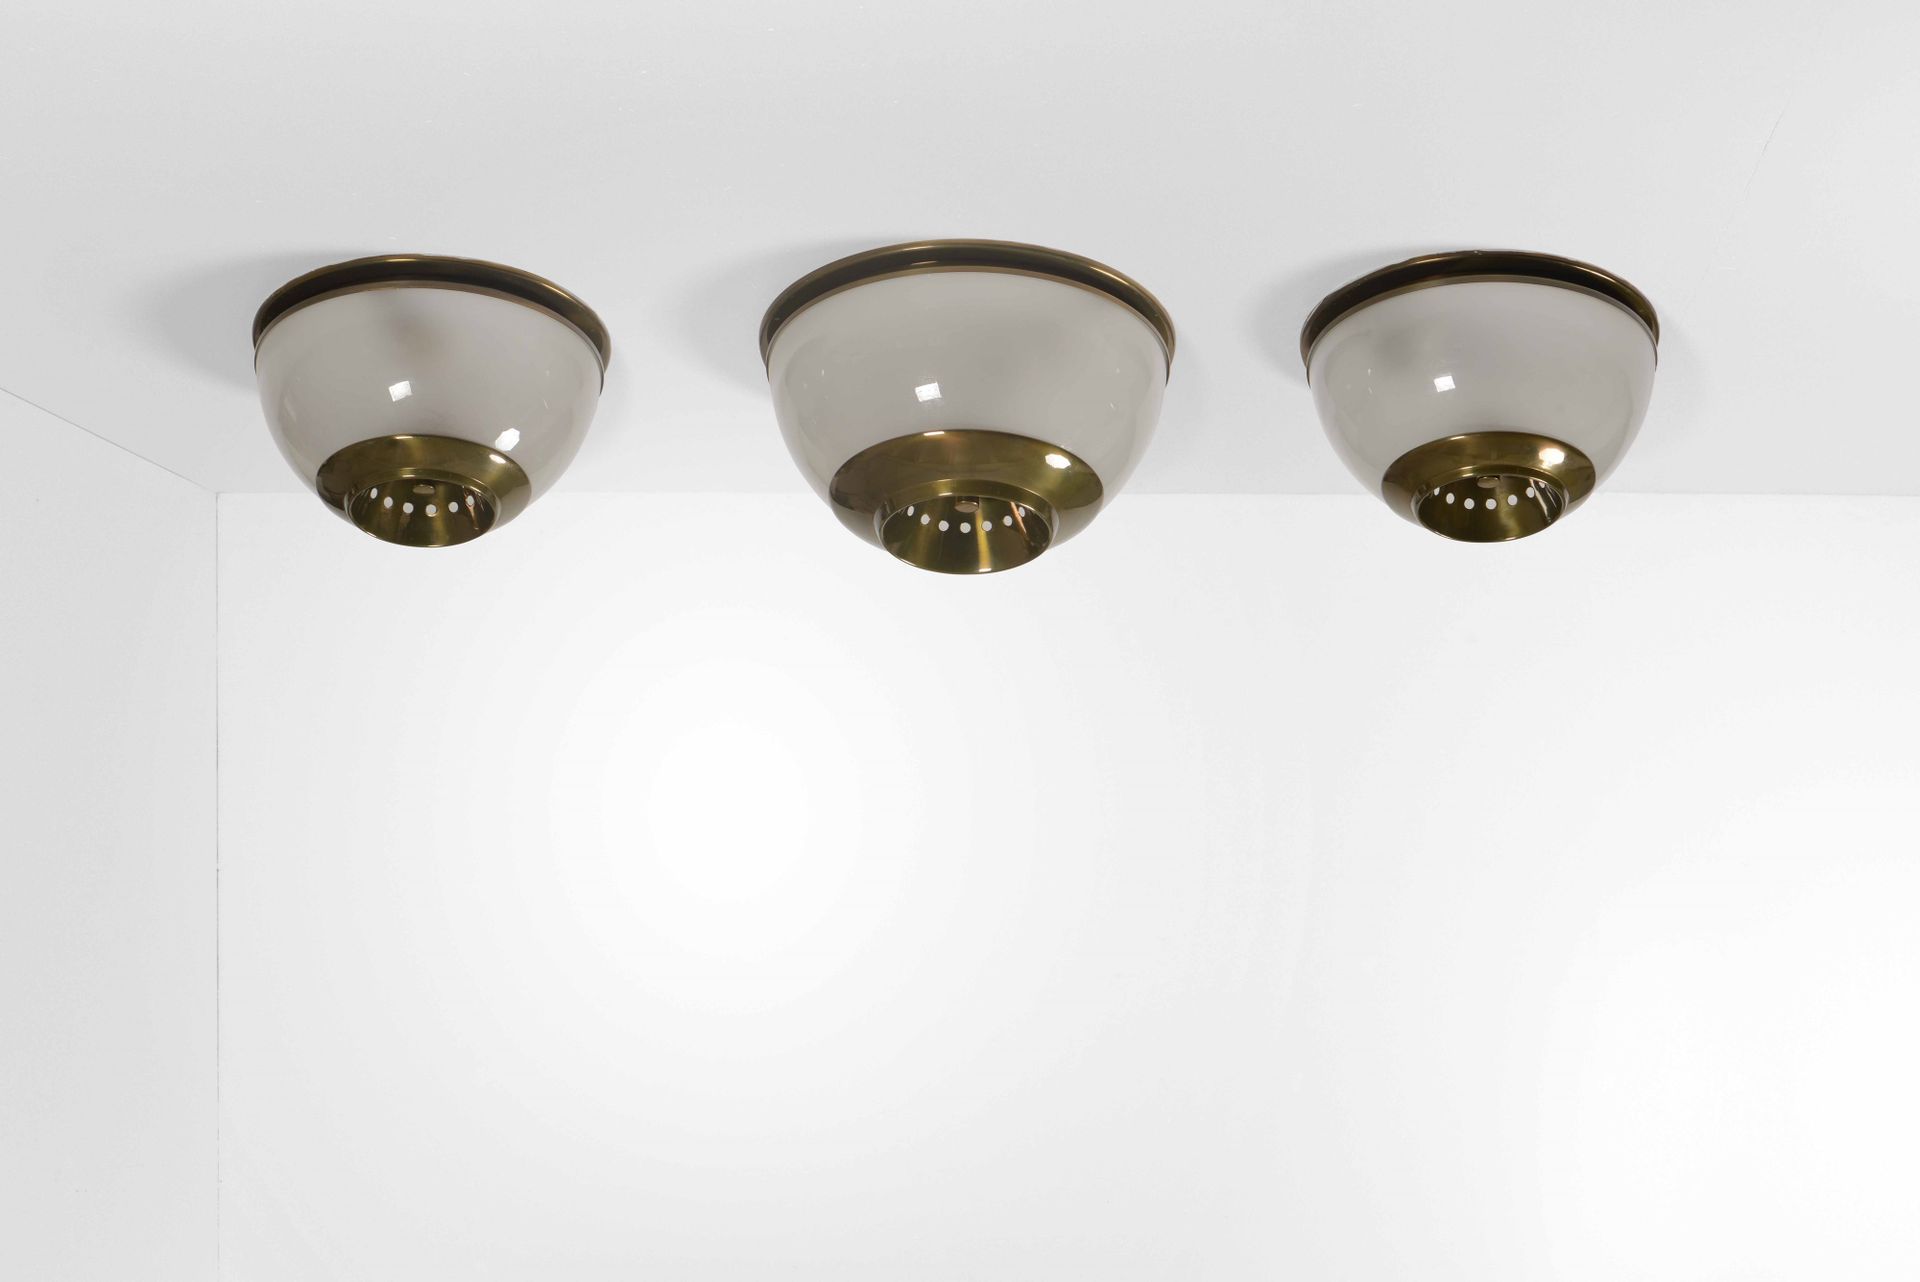 Luigi Caccia Dominioni, Set of three ceiling lamps, one large and two small. Bra&hellip;